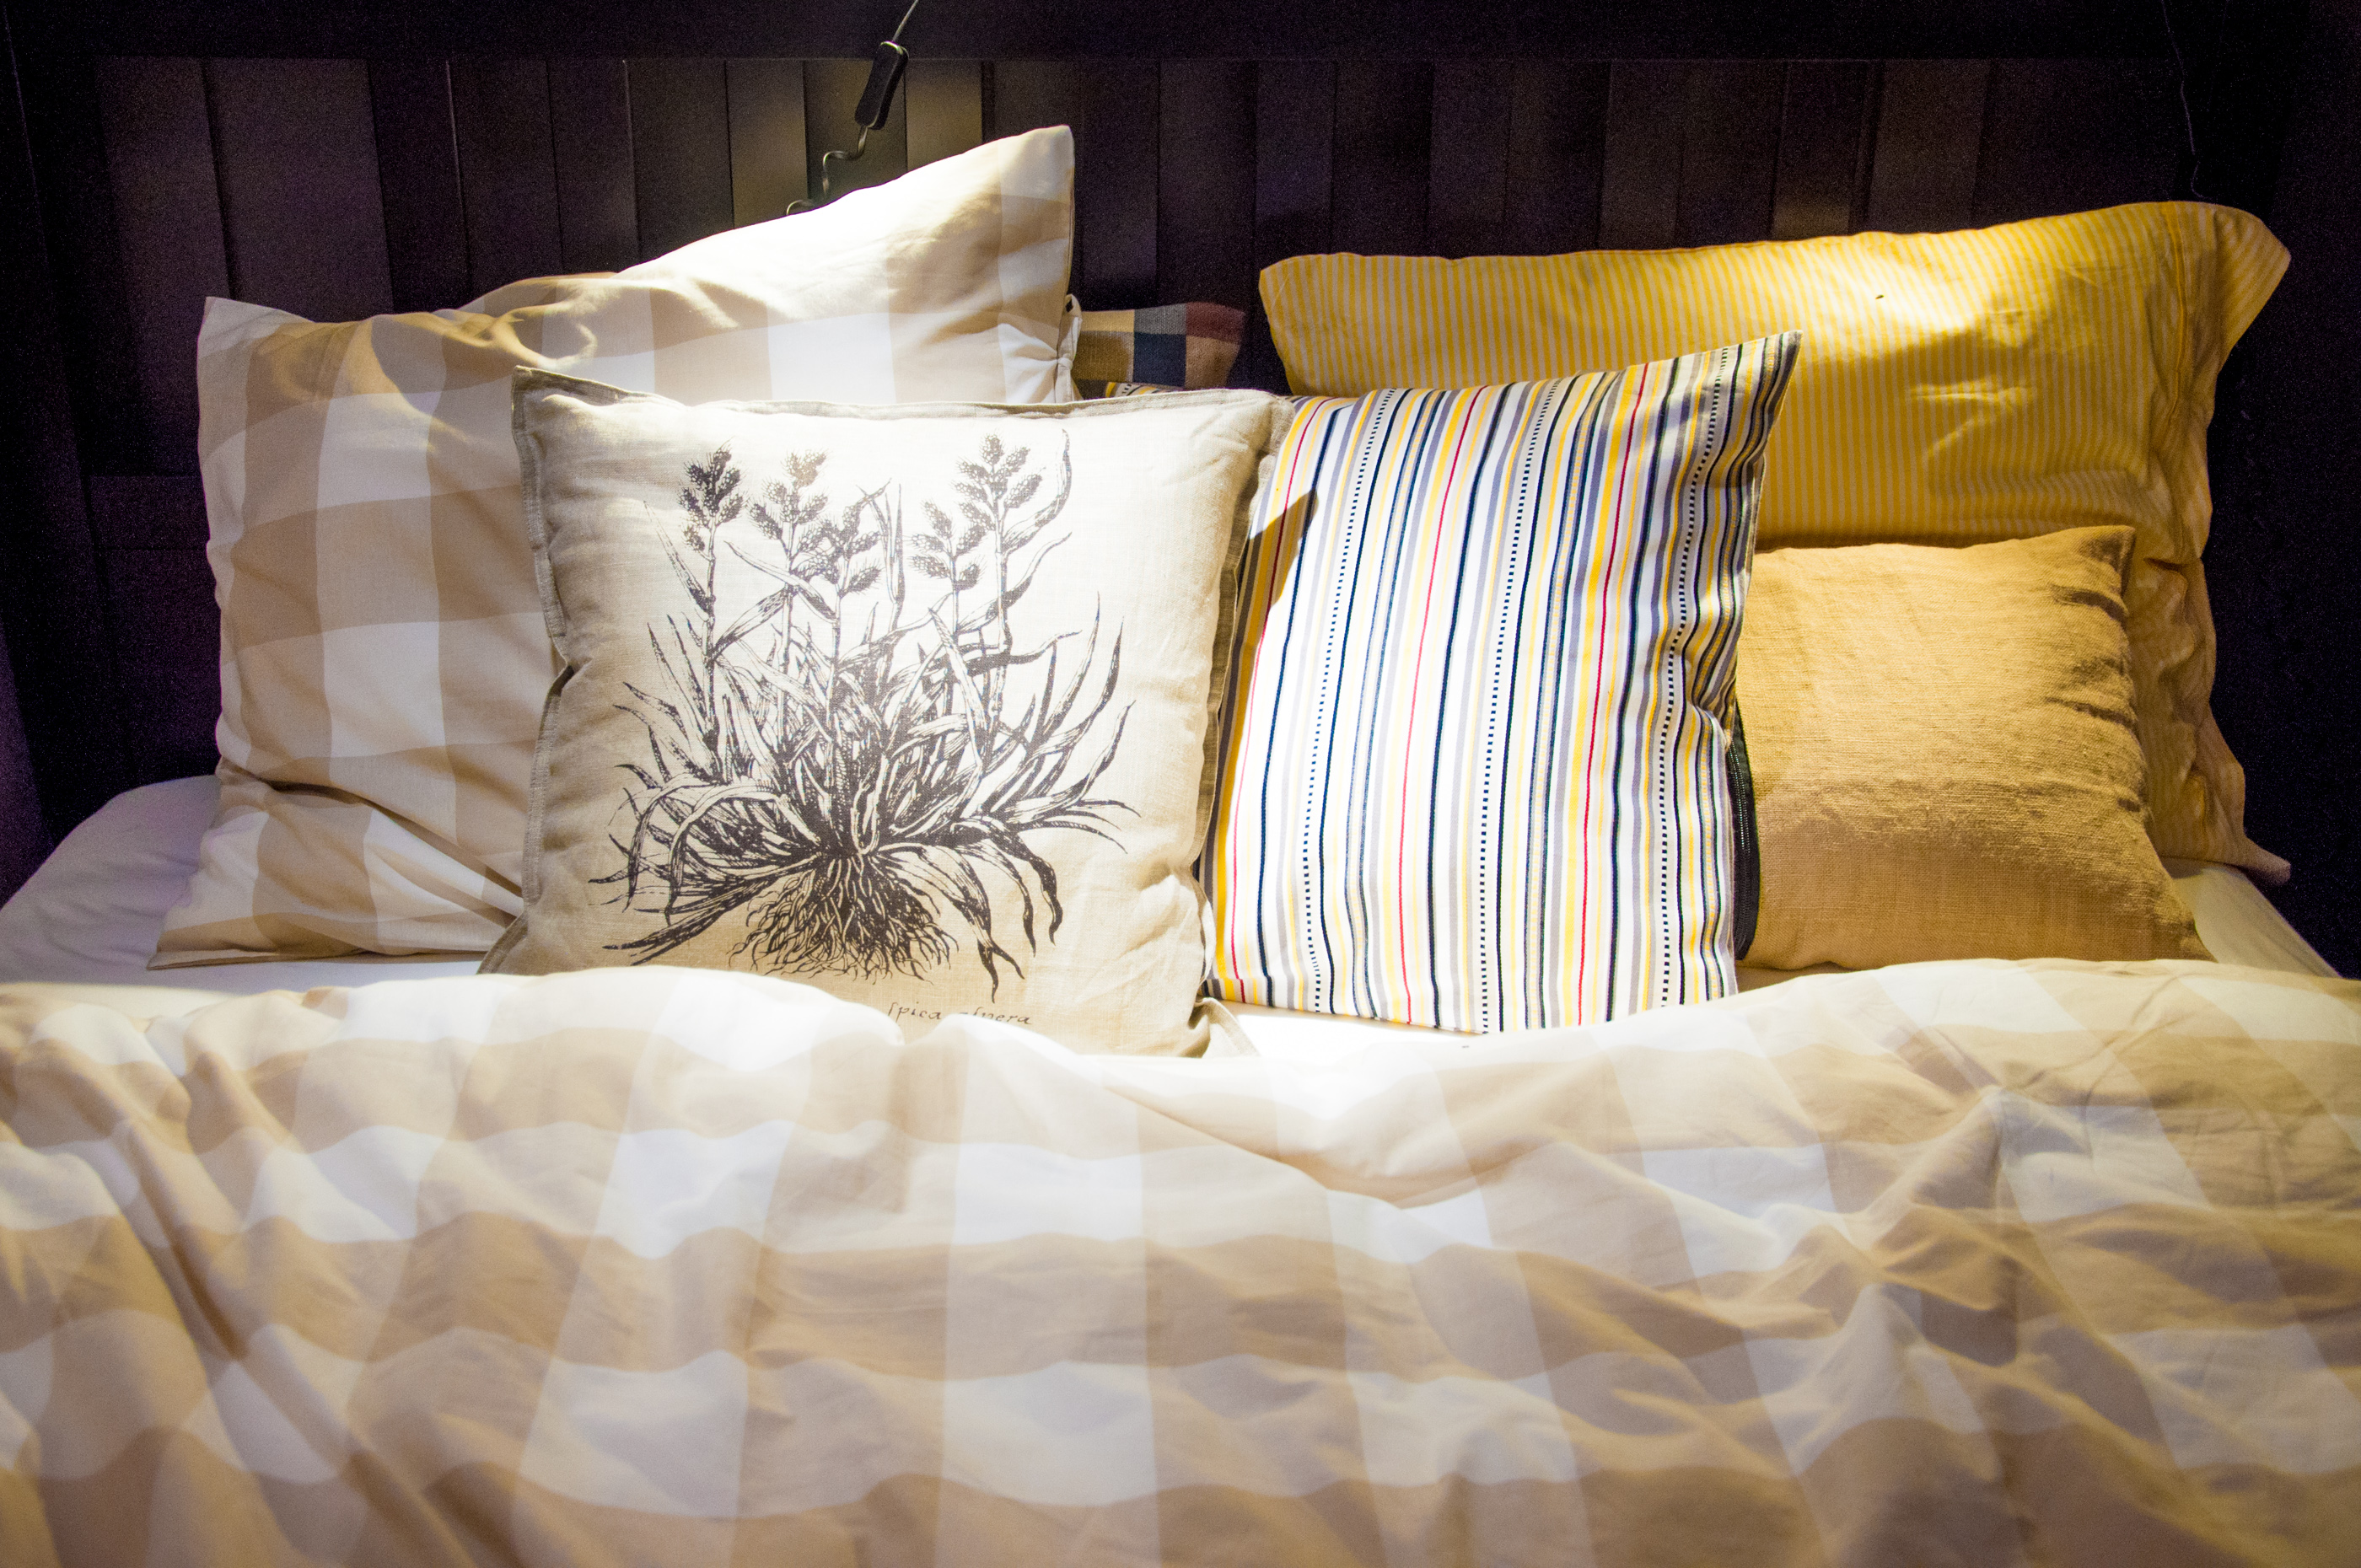 pillows on a bed, Apartment, Shiny, Motel, Night, HQ Photo